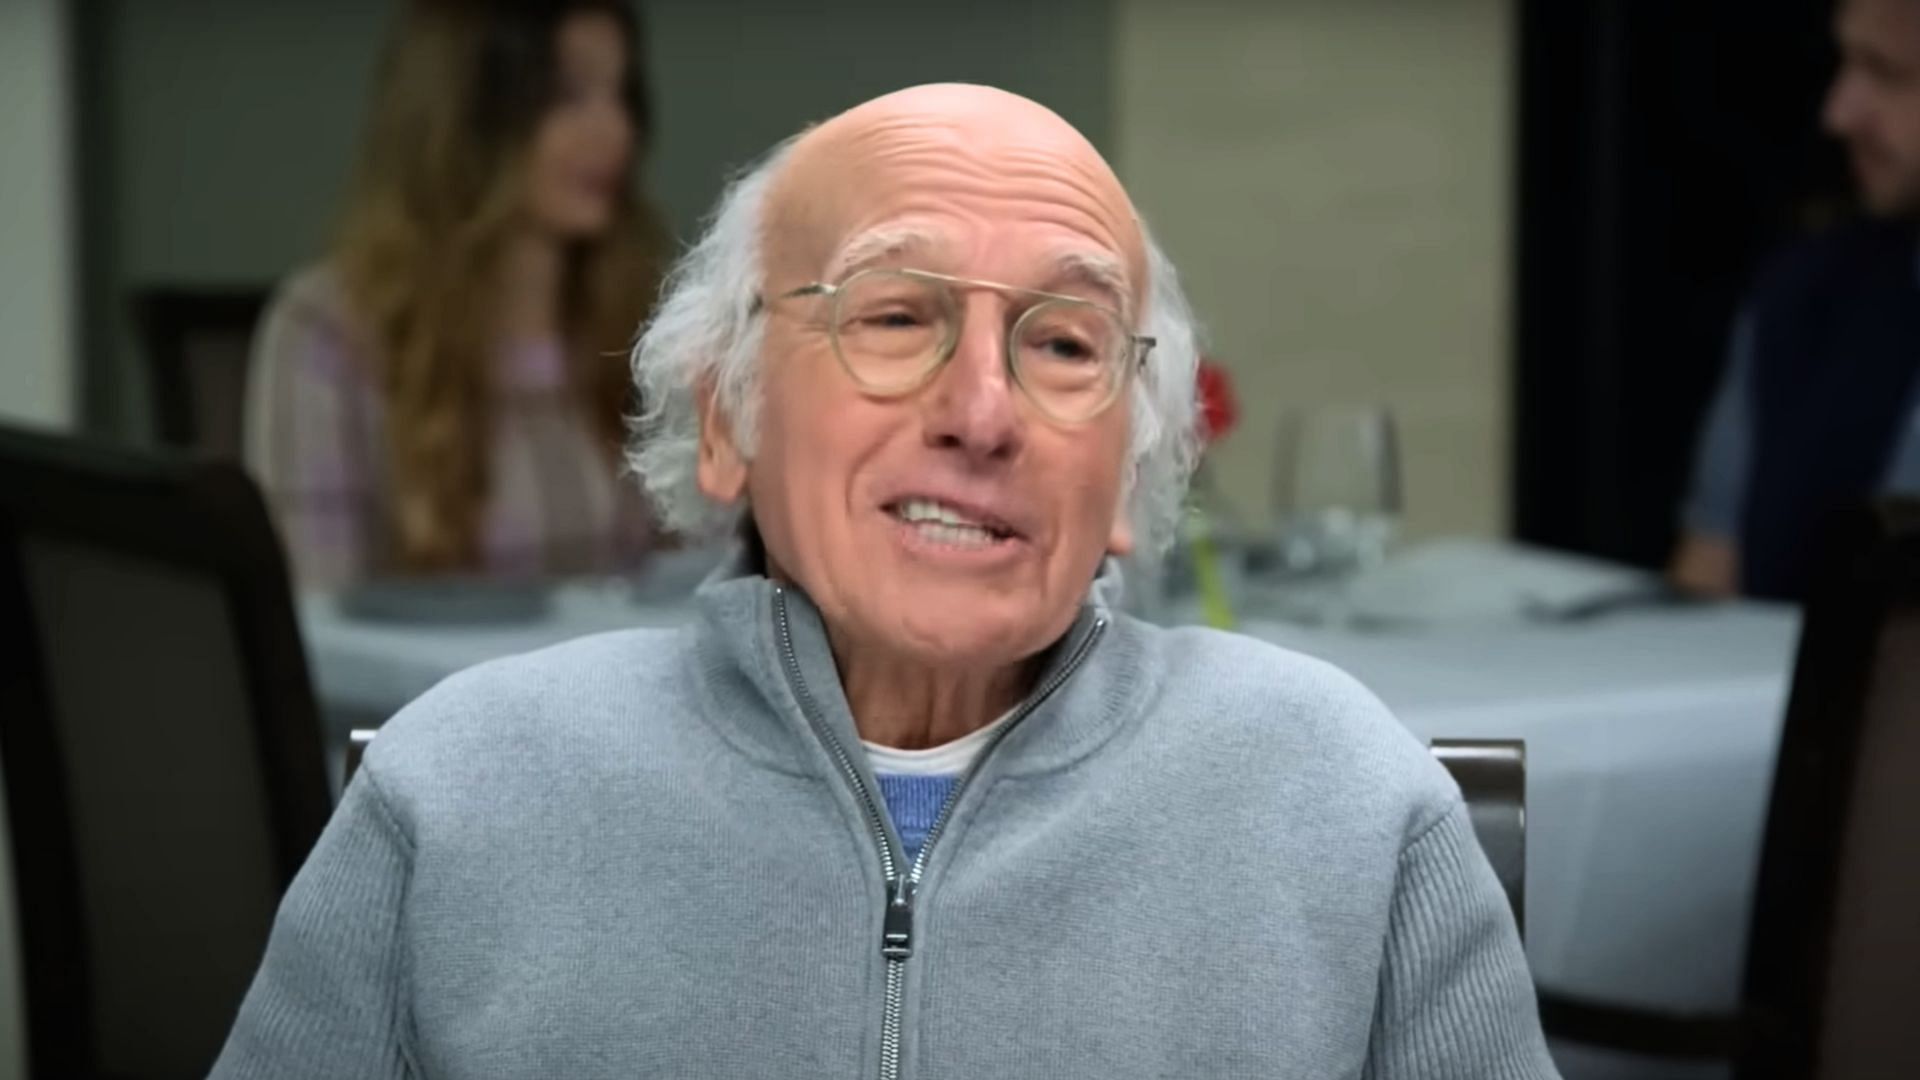 Larry David in a scene from Curb Your Enthusiasm (Image via HBO)